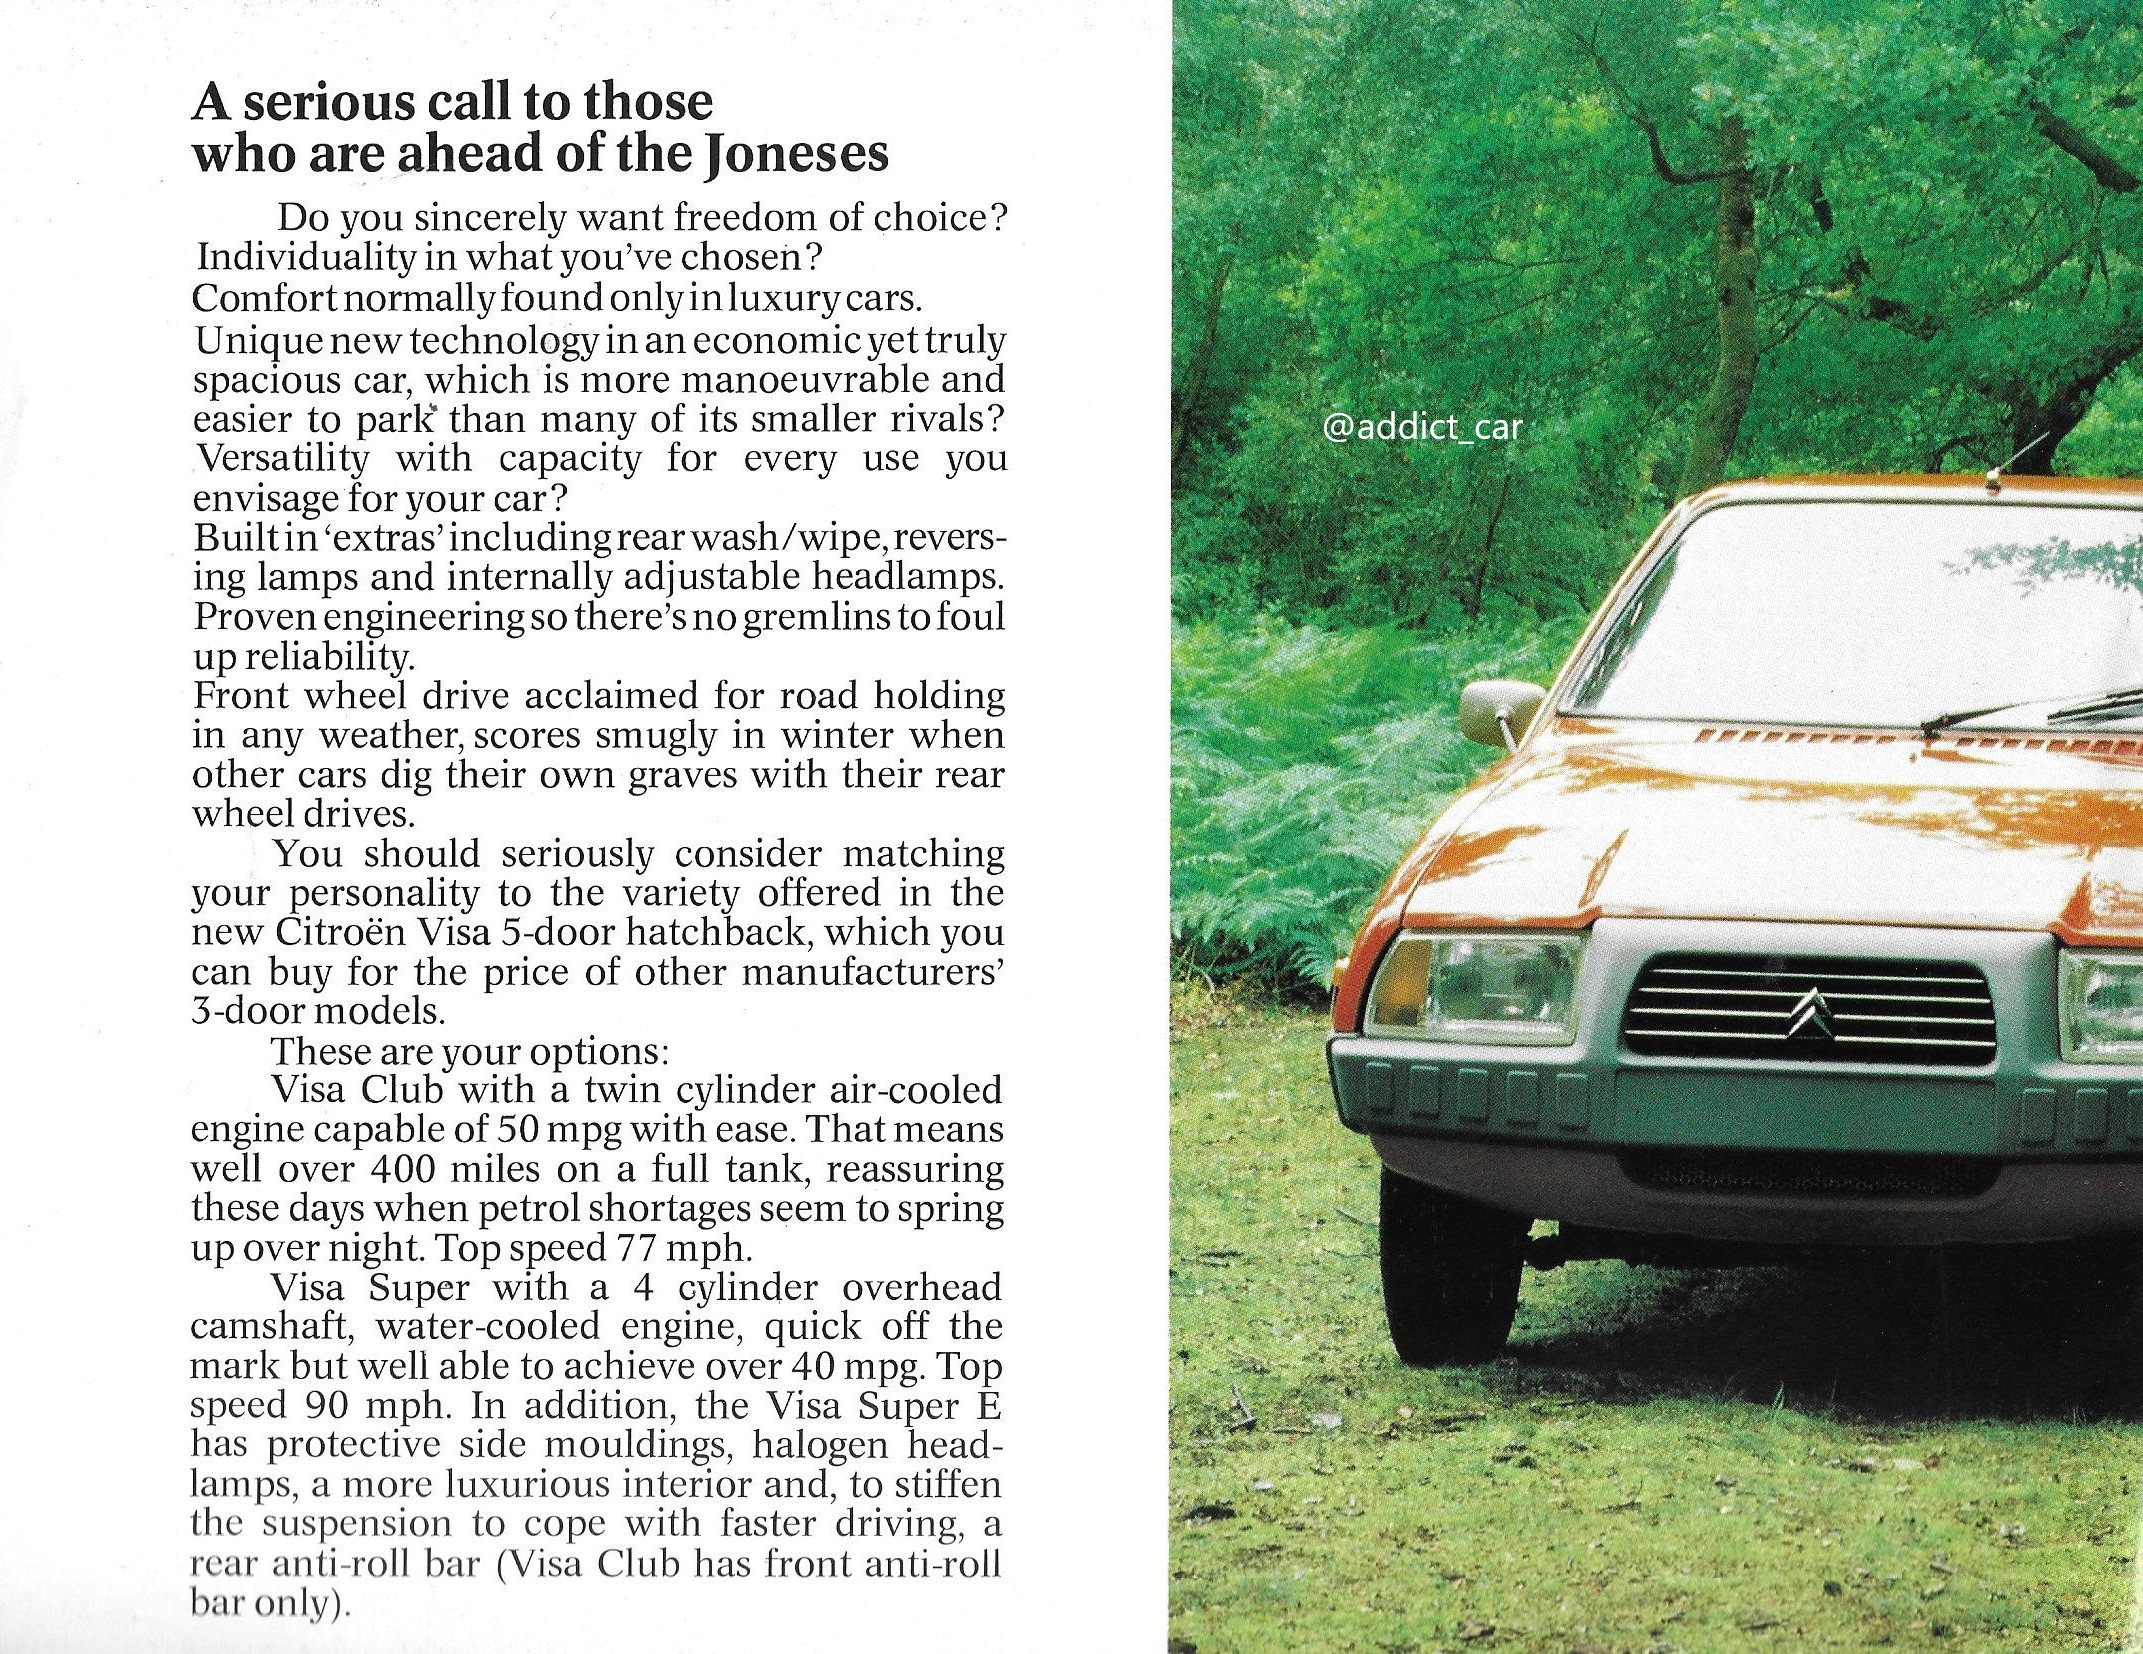 Car Brochure Addict on X: The text in this first British brochure on the  new 1978 Citroën Visa is aimed to appeal to individualists. These  early-model Visas certainly had their quirks, especially